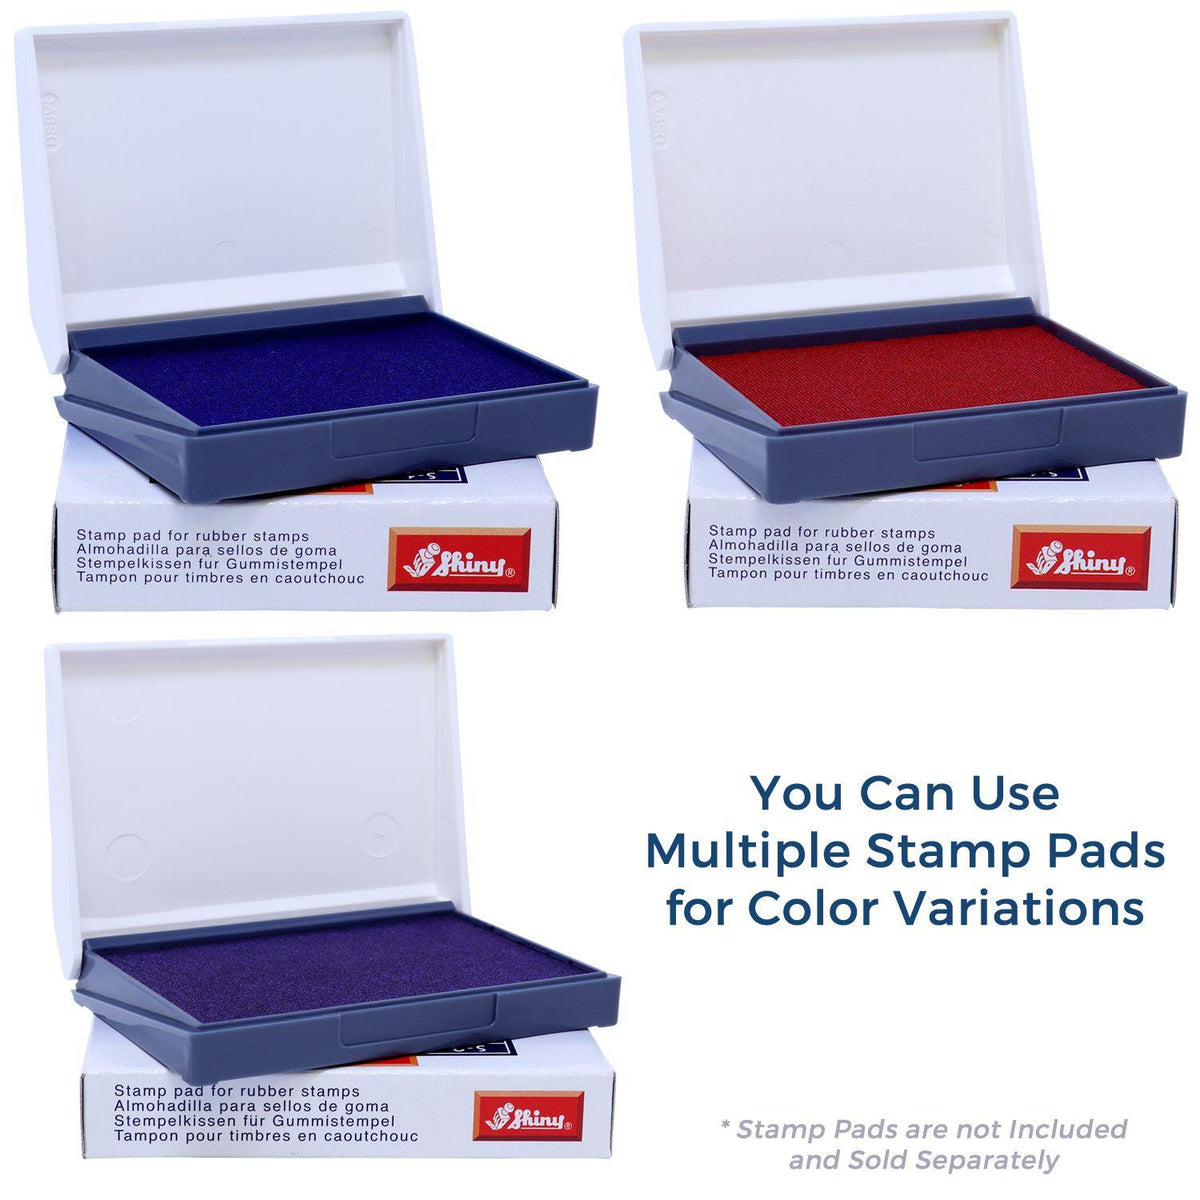 Stamp Pads for Large Rewrite In Cursive Rubber Stamp Available